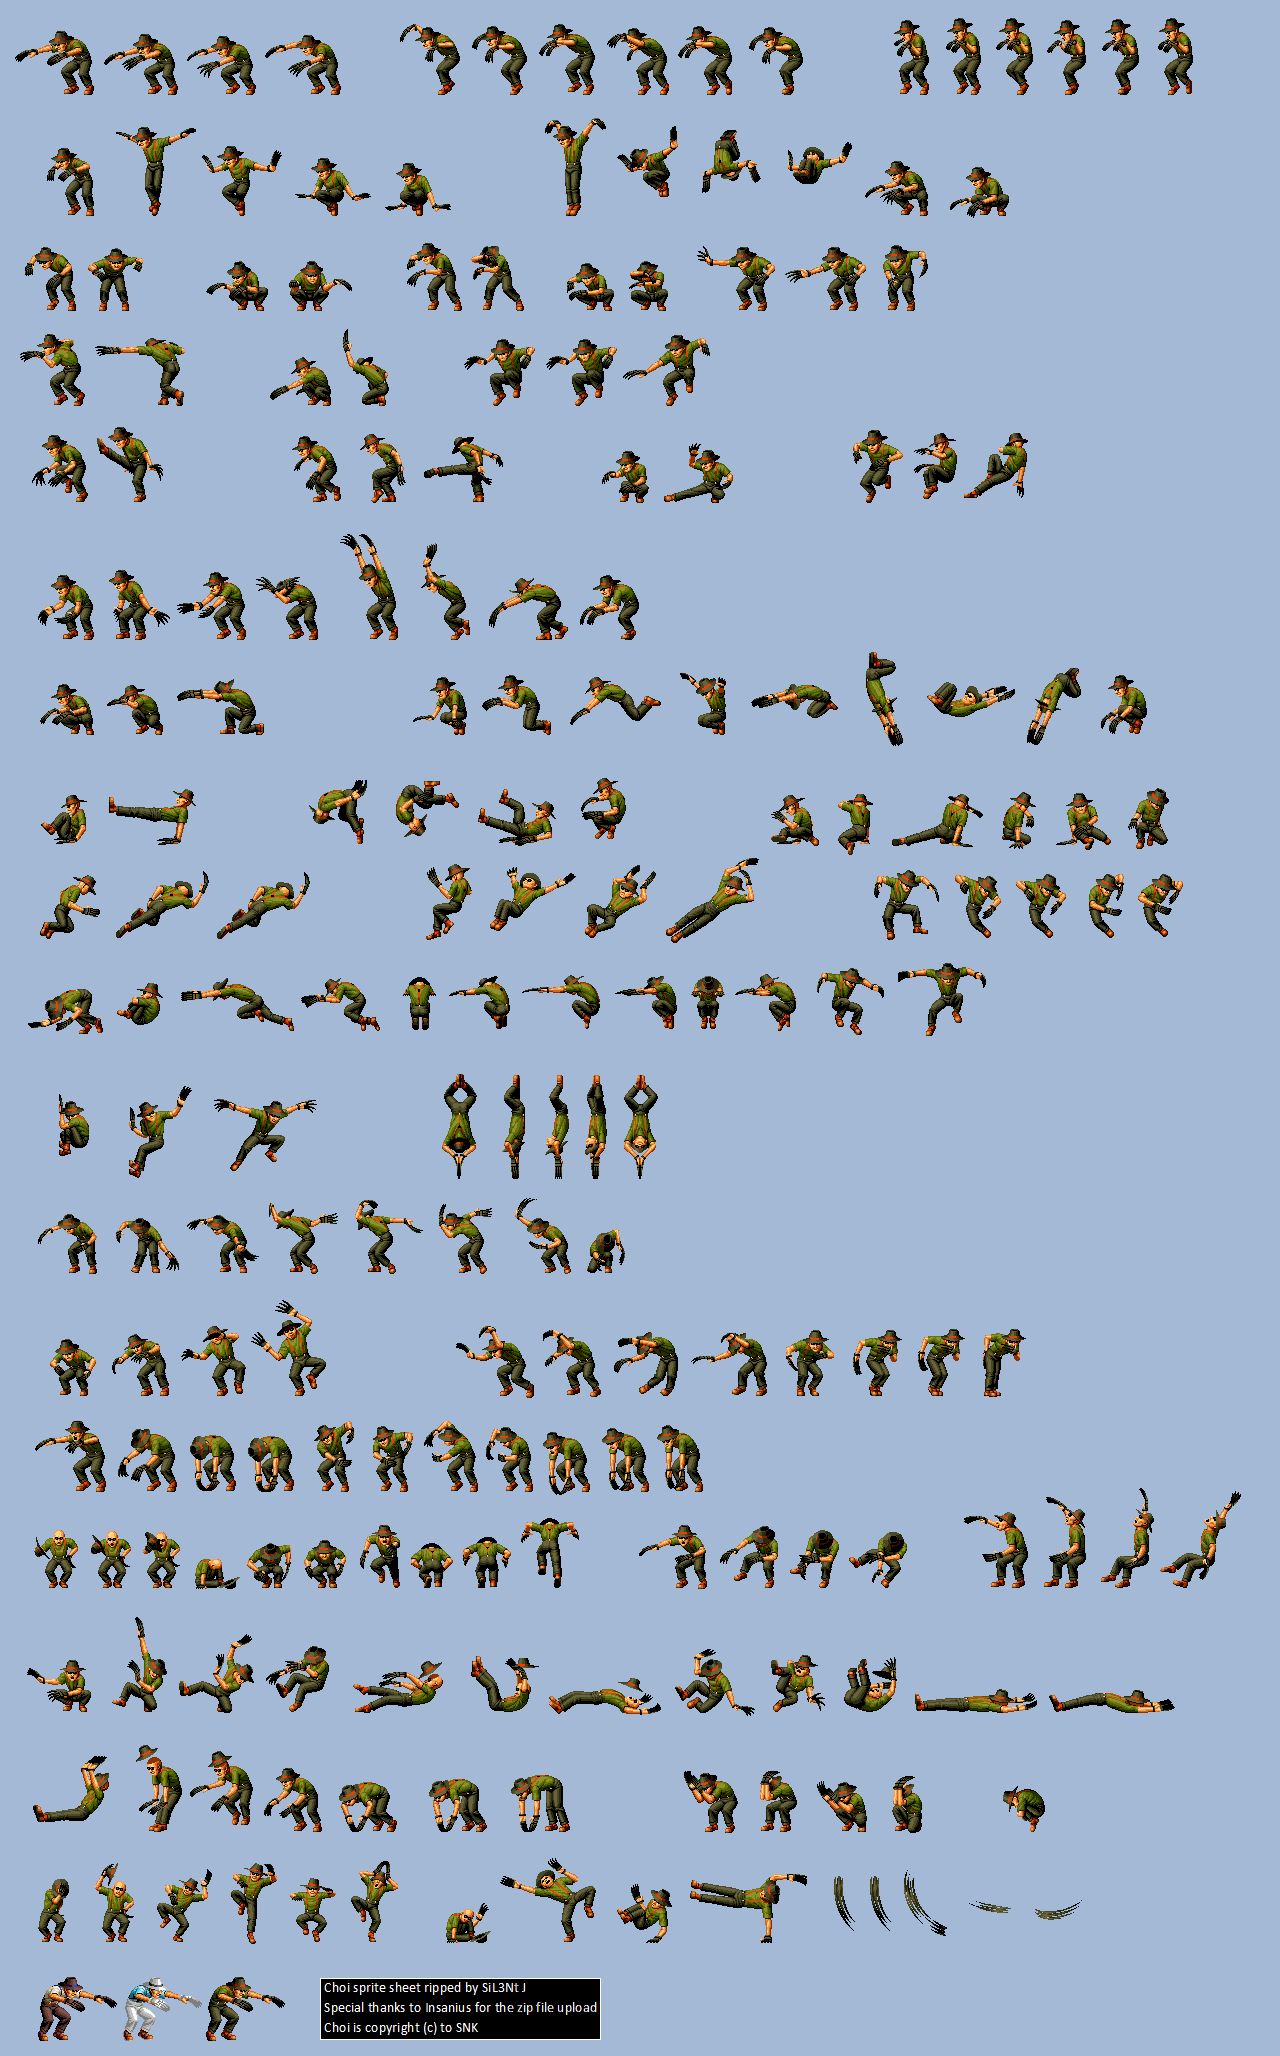 The king of fighters Kyo-1 sprite sheet by bermudez450 on DeviantArt